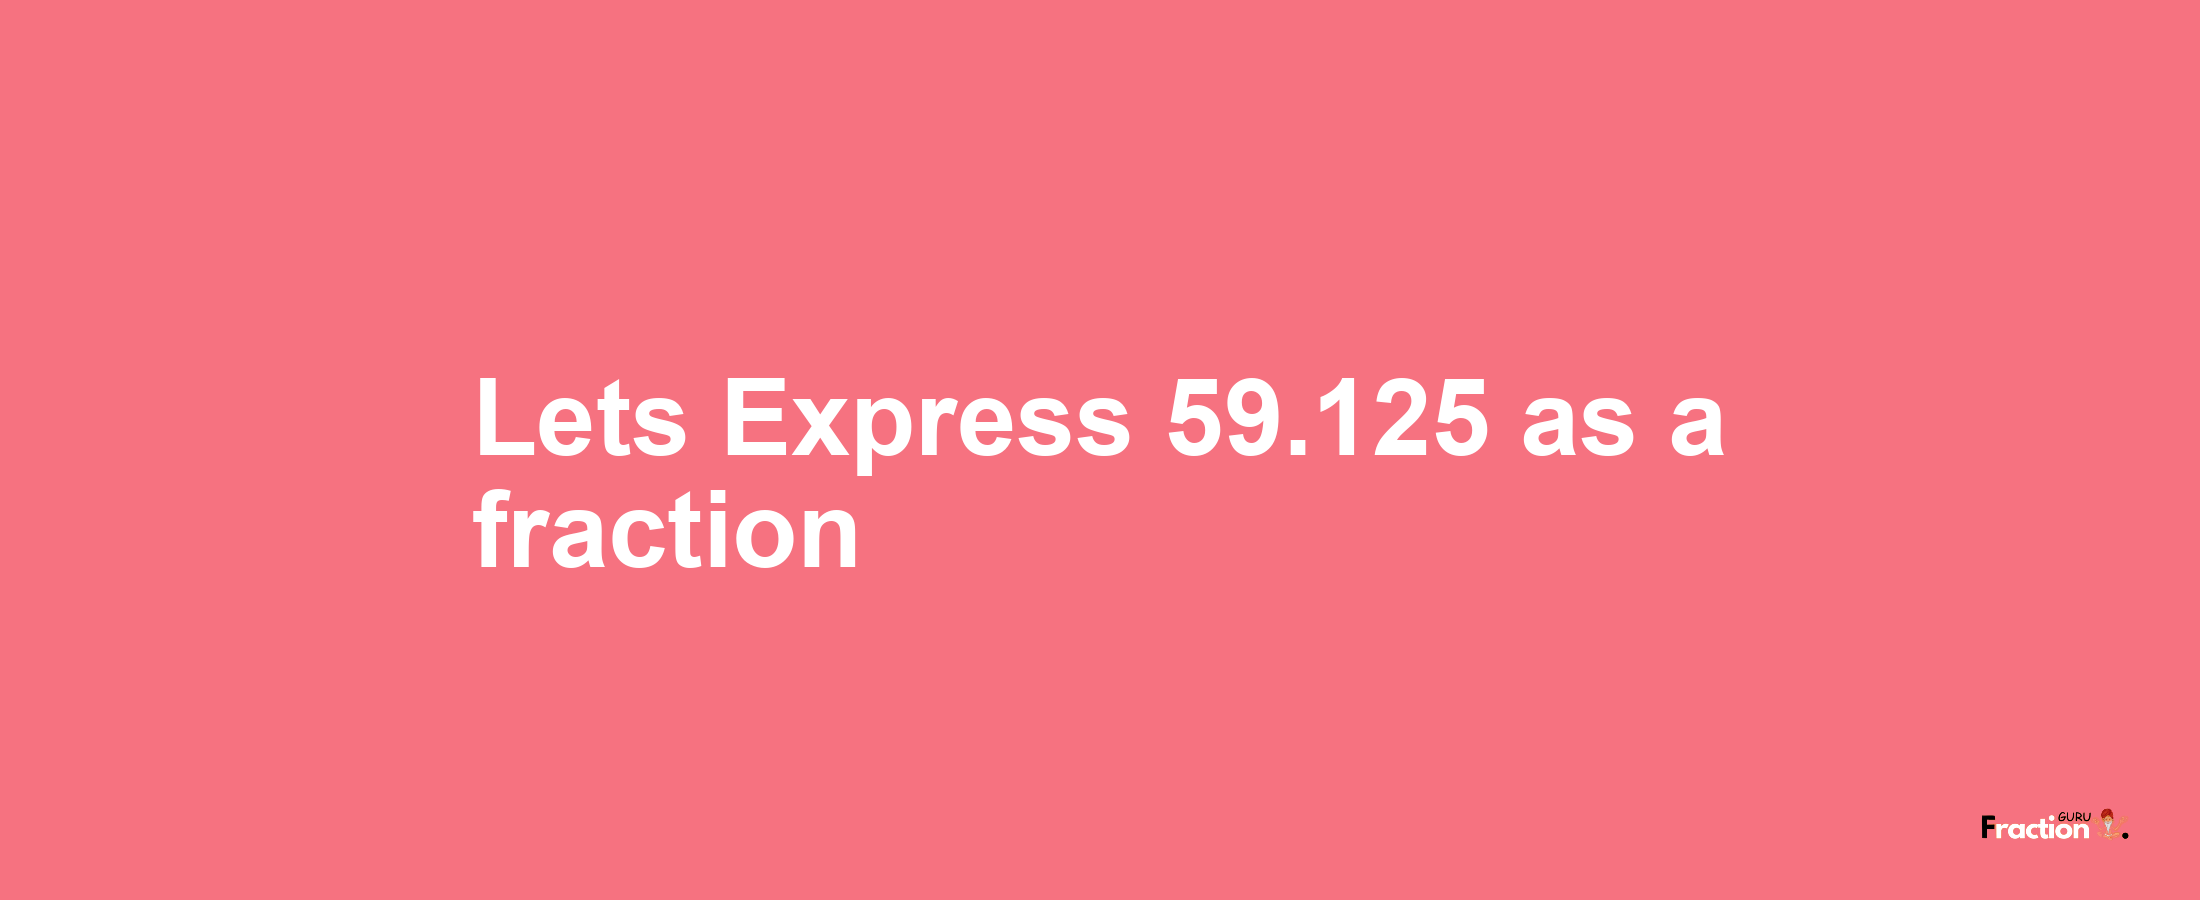 Lets Express 59.125 as afraction